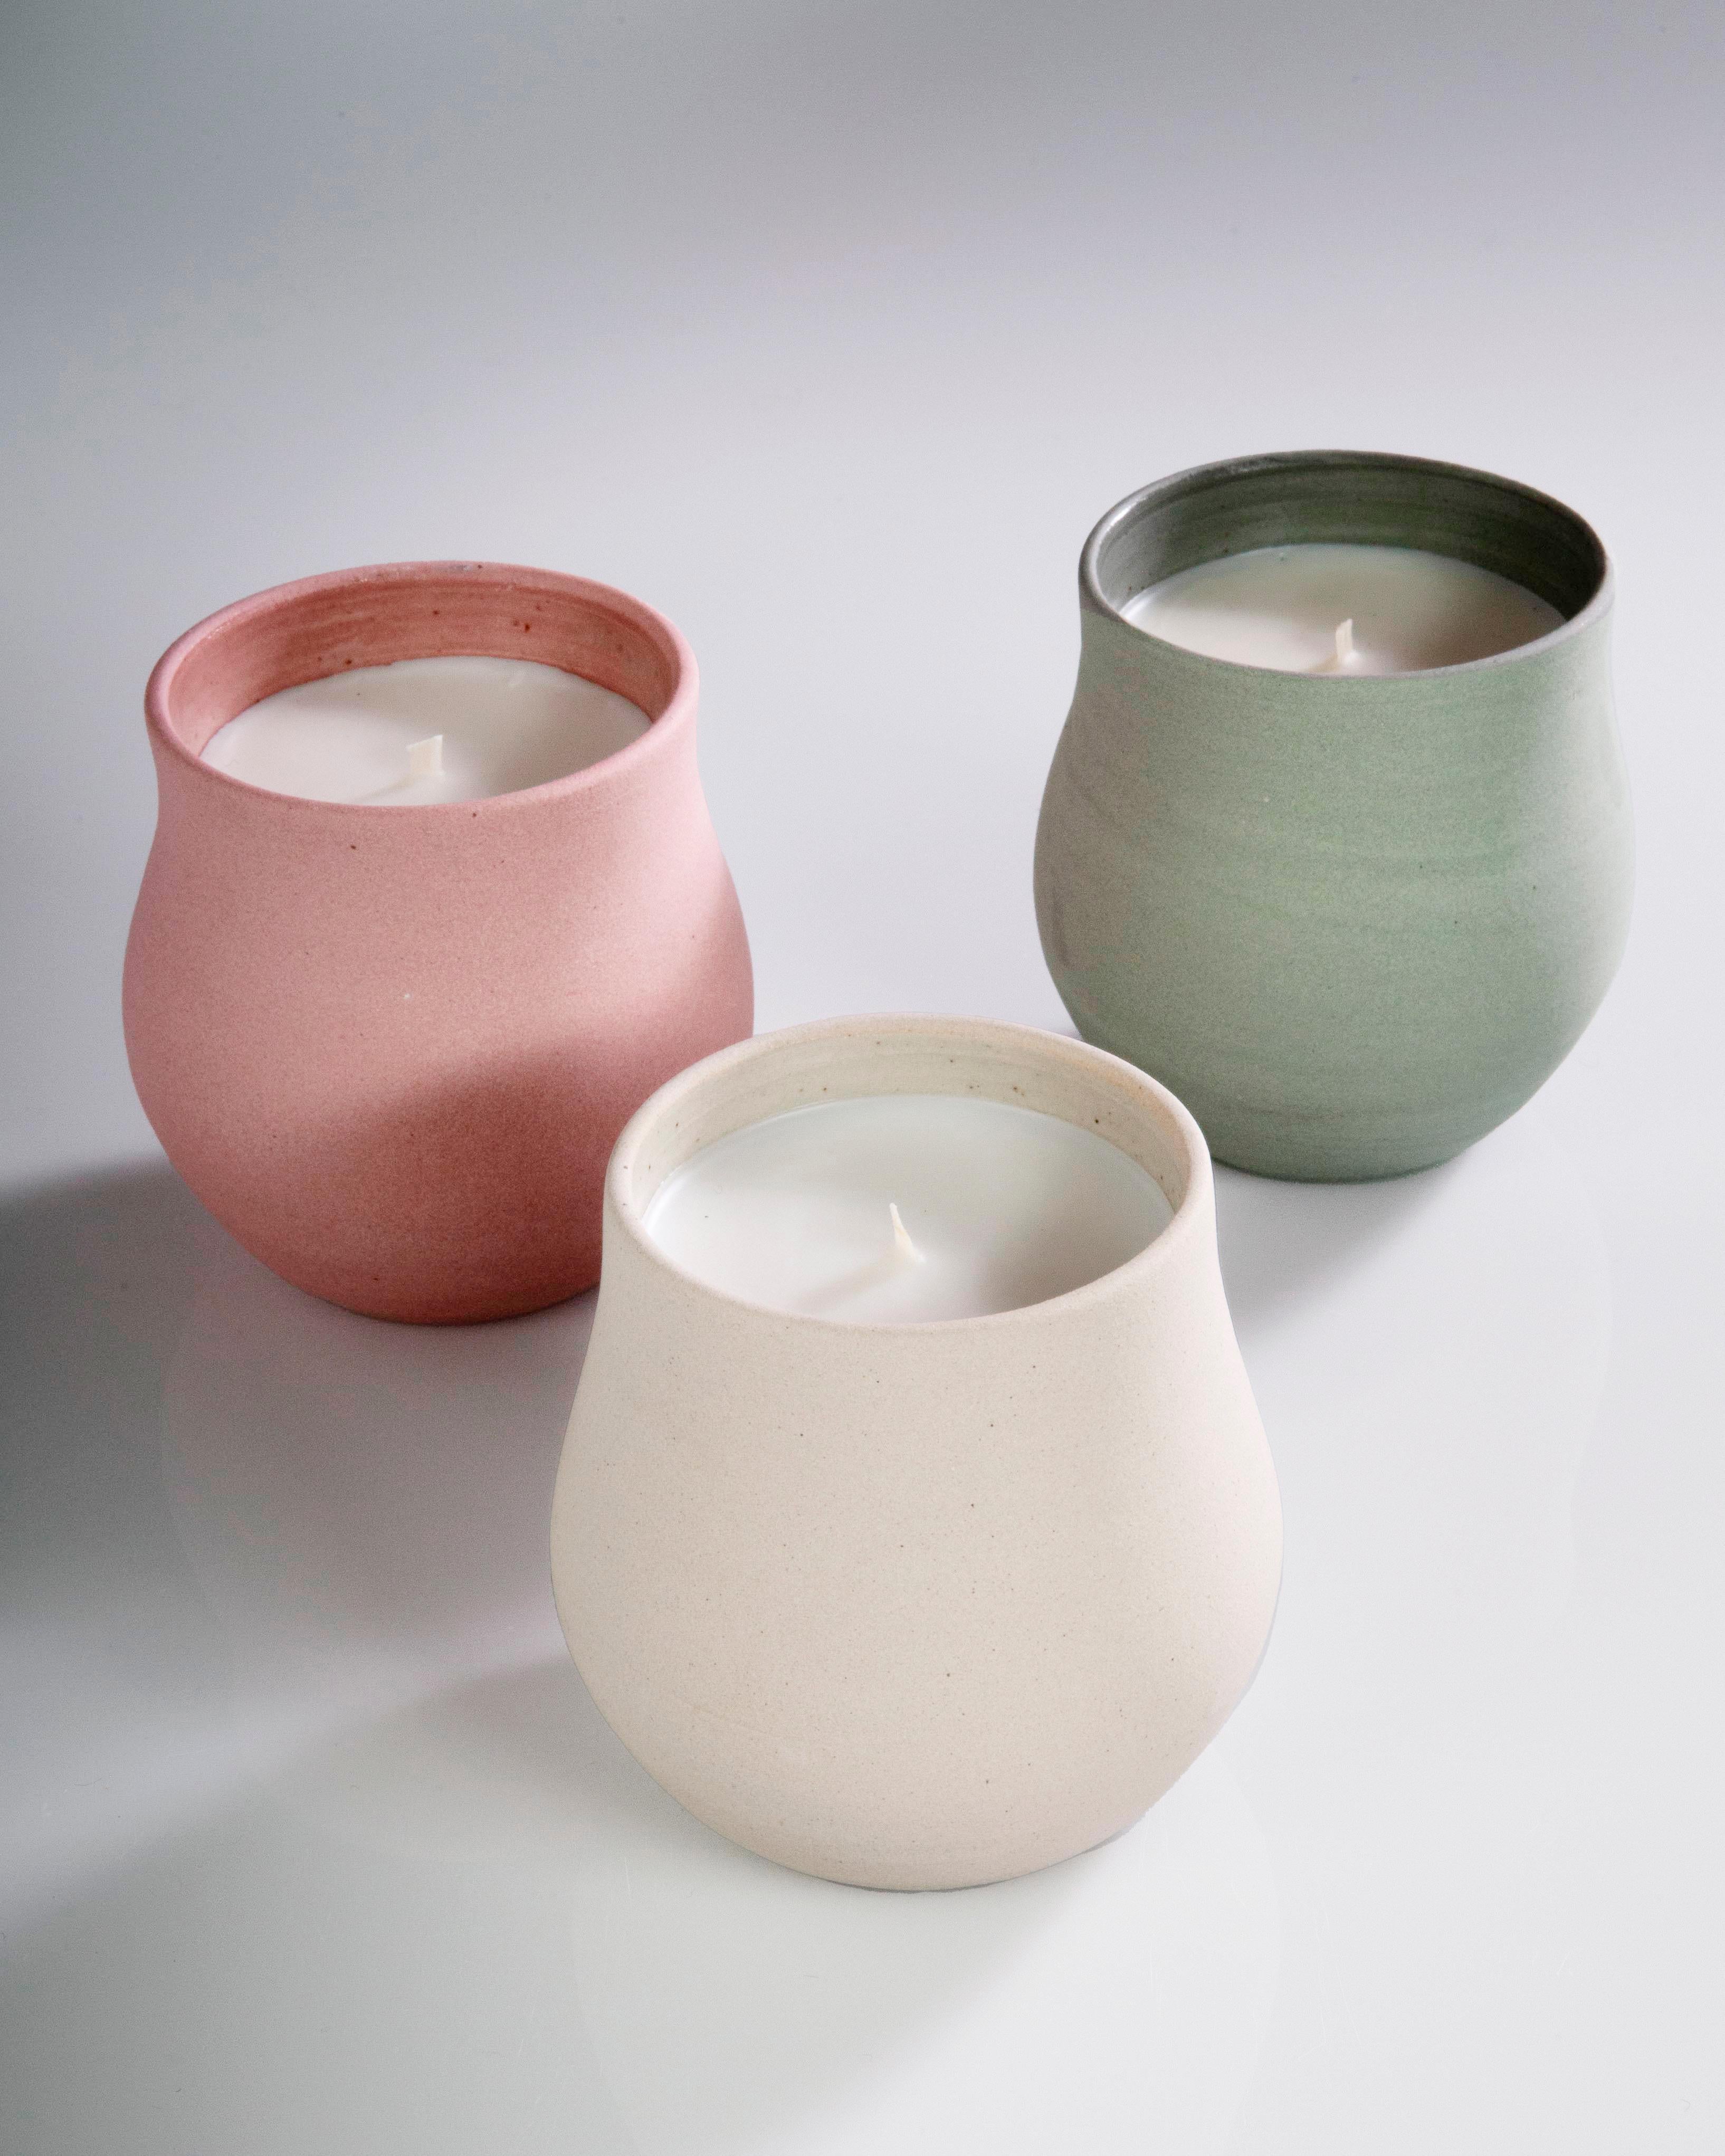 Hand-Crafted Artisan Scented Candles in Handmade Ceramic Vessels, White, in Stock For Sale